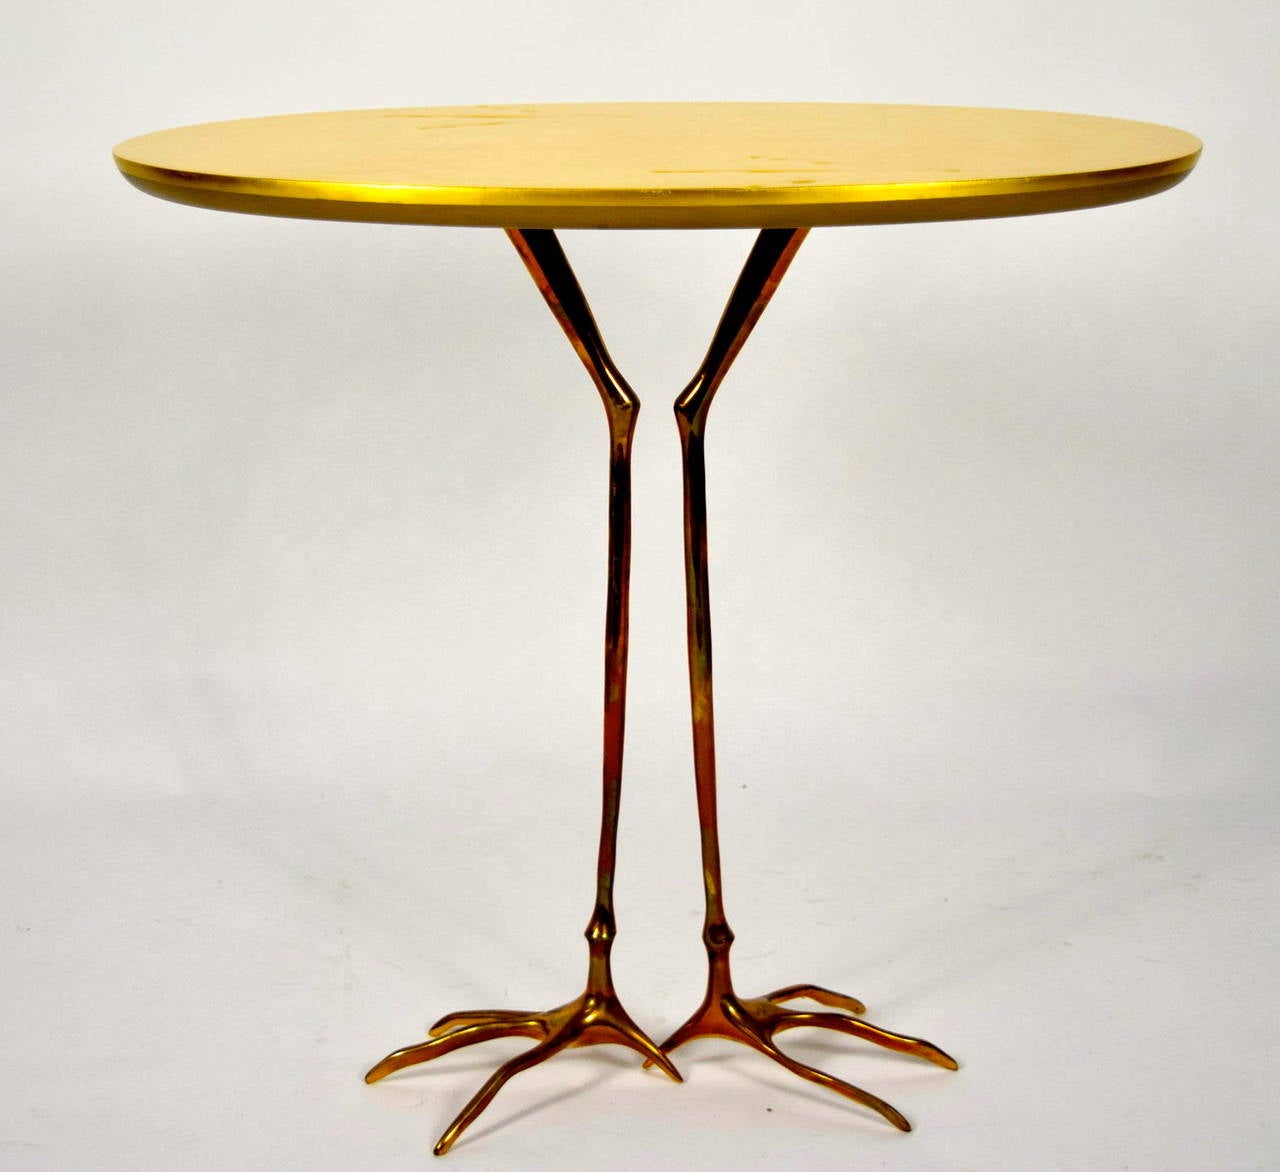 Beautiful gold leaf table with polished bronze base by Meret Oppenheim. In pristine condition.